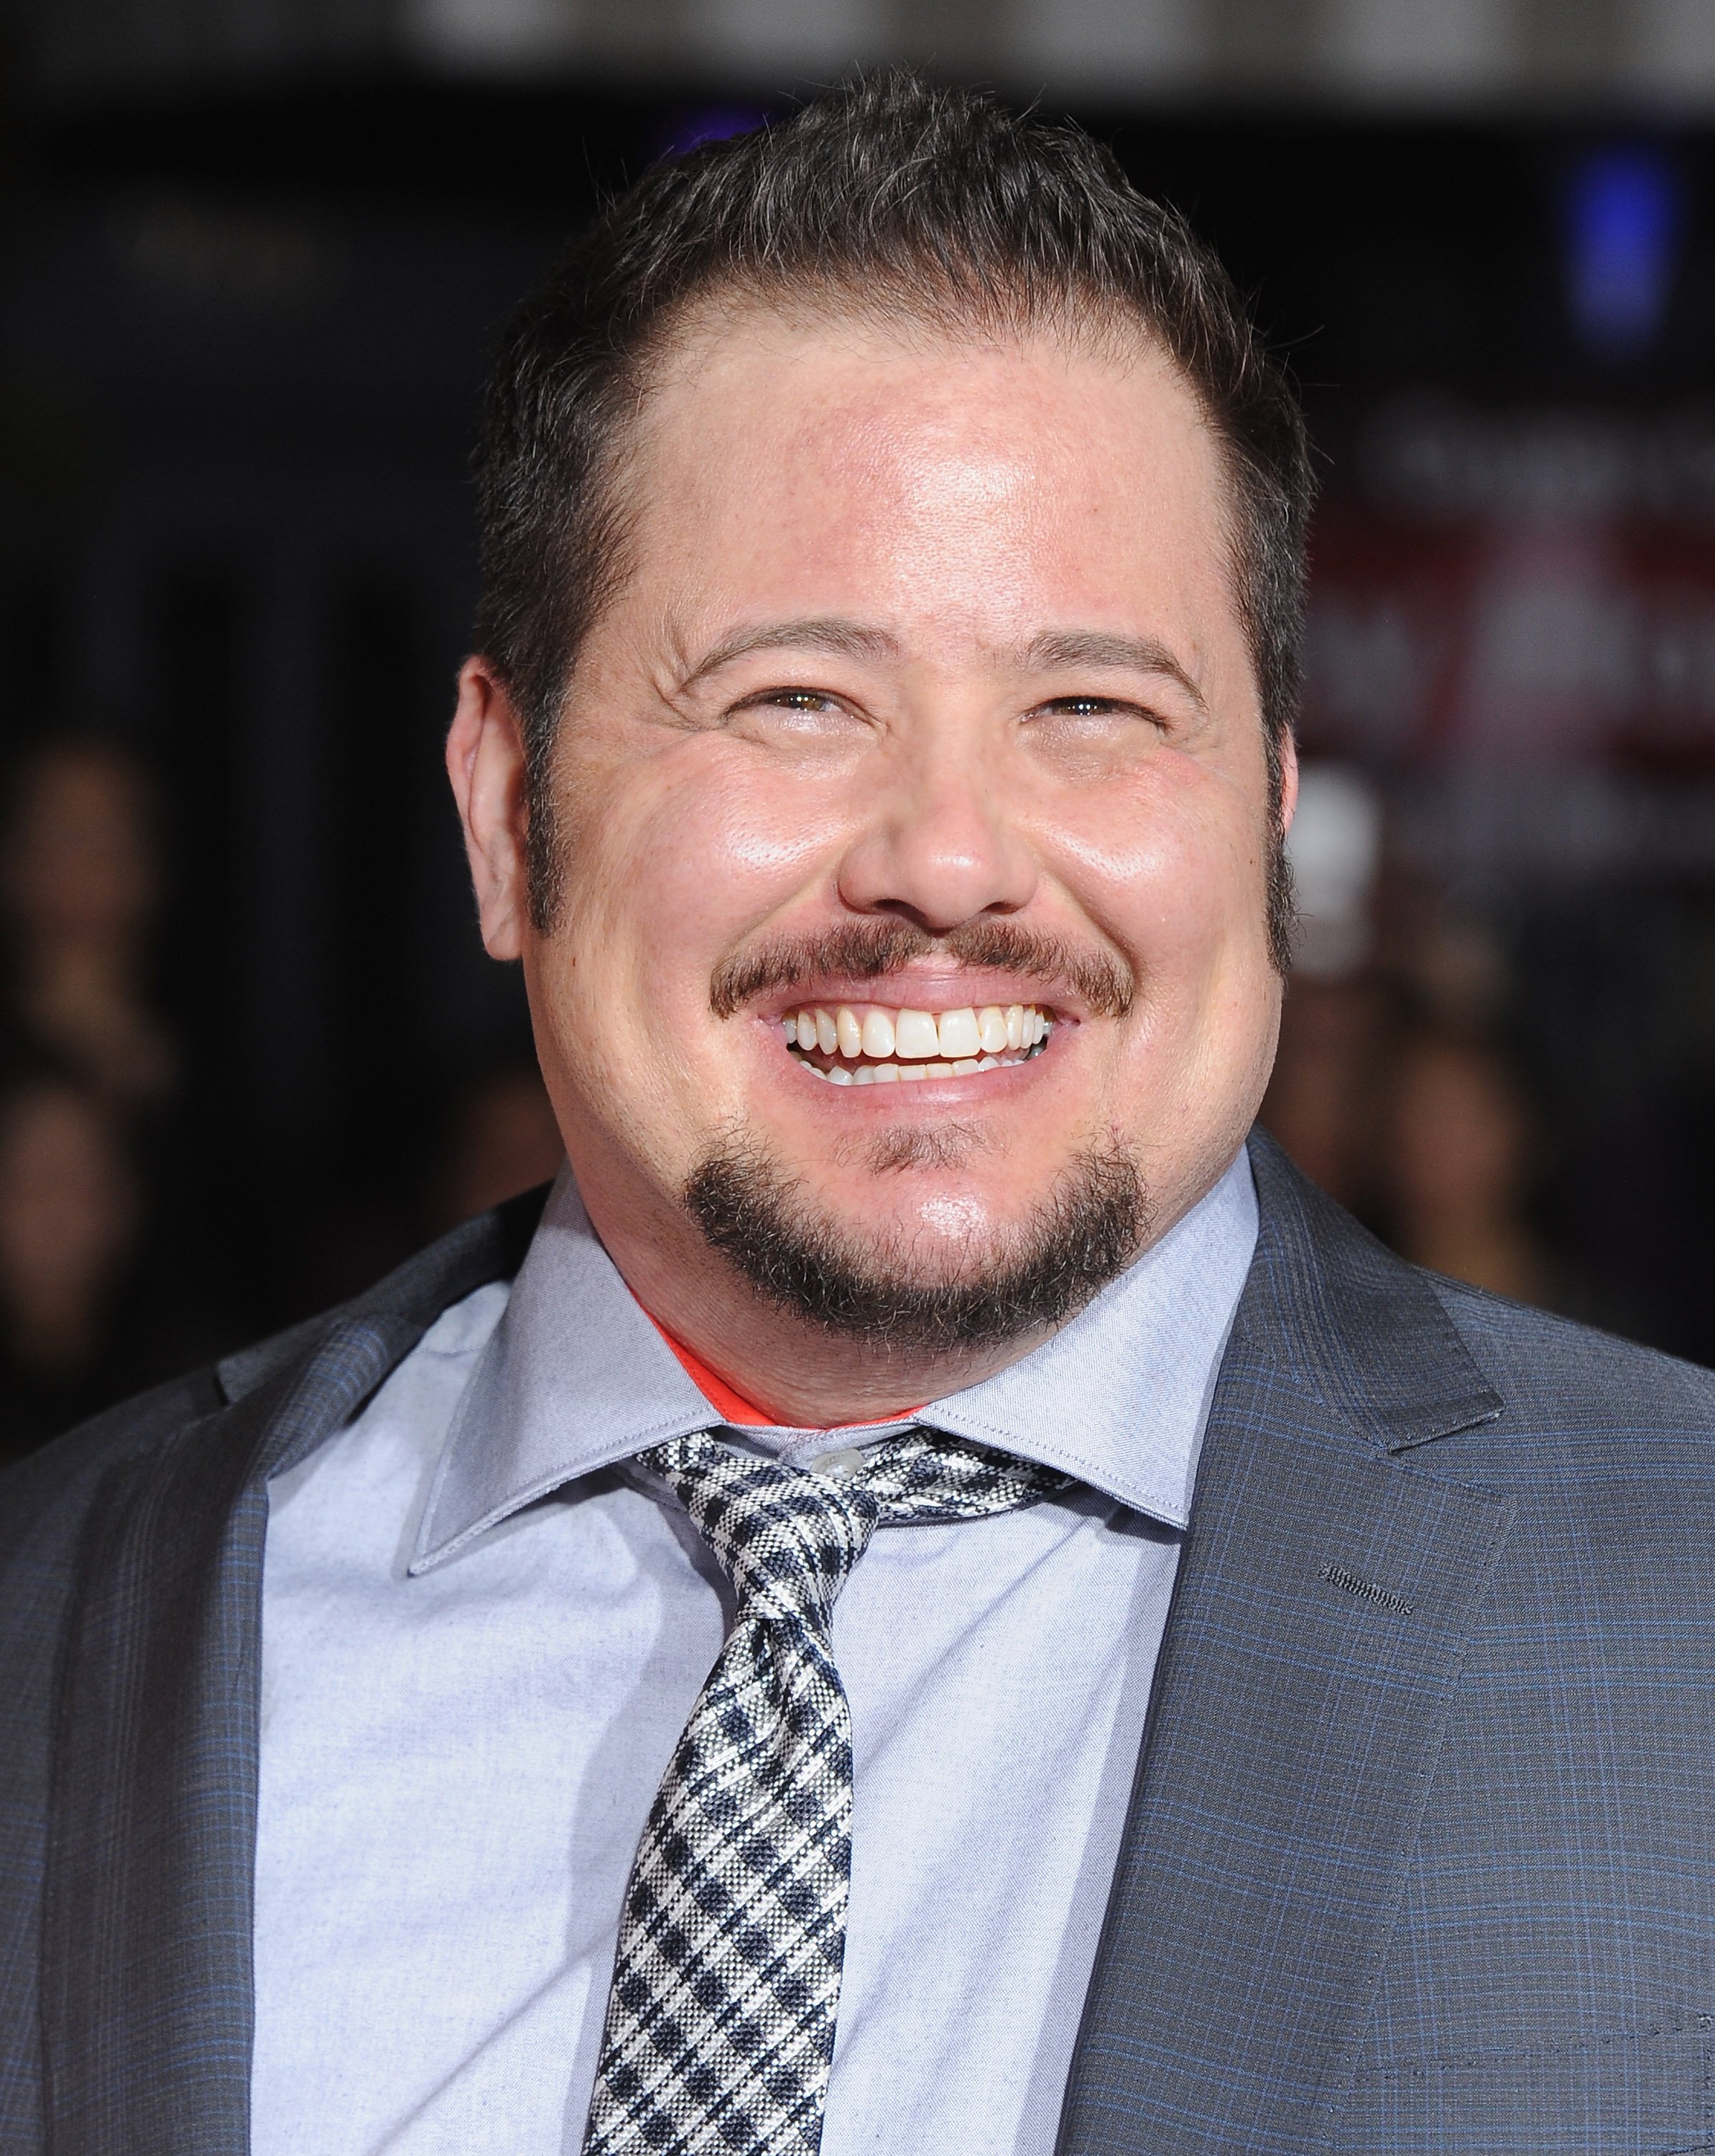 Chaz Bono arrives at the Los Angeles Premiere Of Focus Features' "The Danish Girl" at Westwood Village Theatre on November 21, 2015 in Westwood, California. | Source: Getty Images 